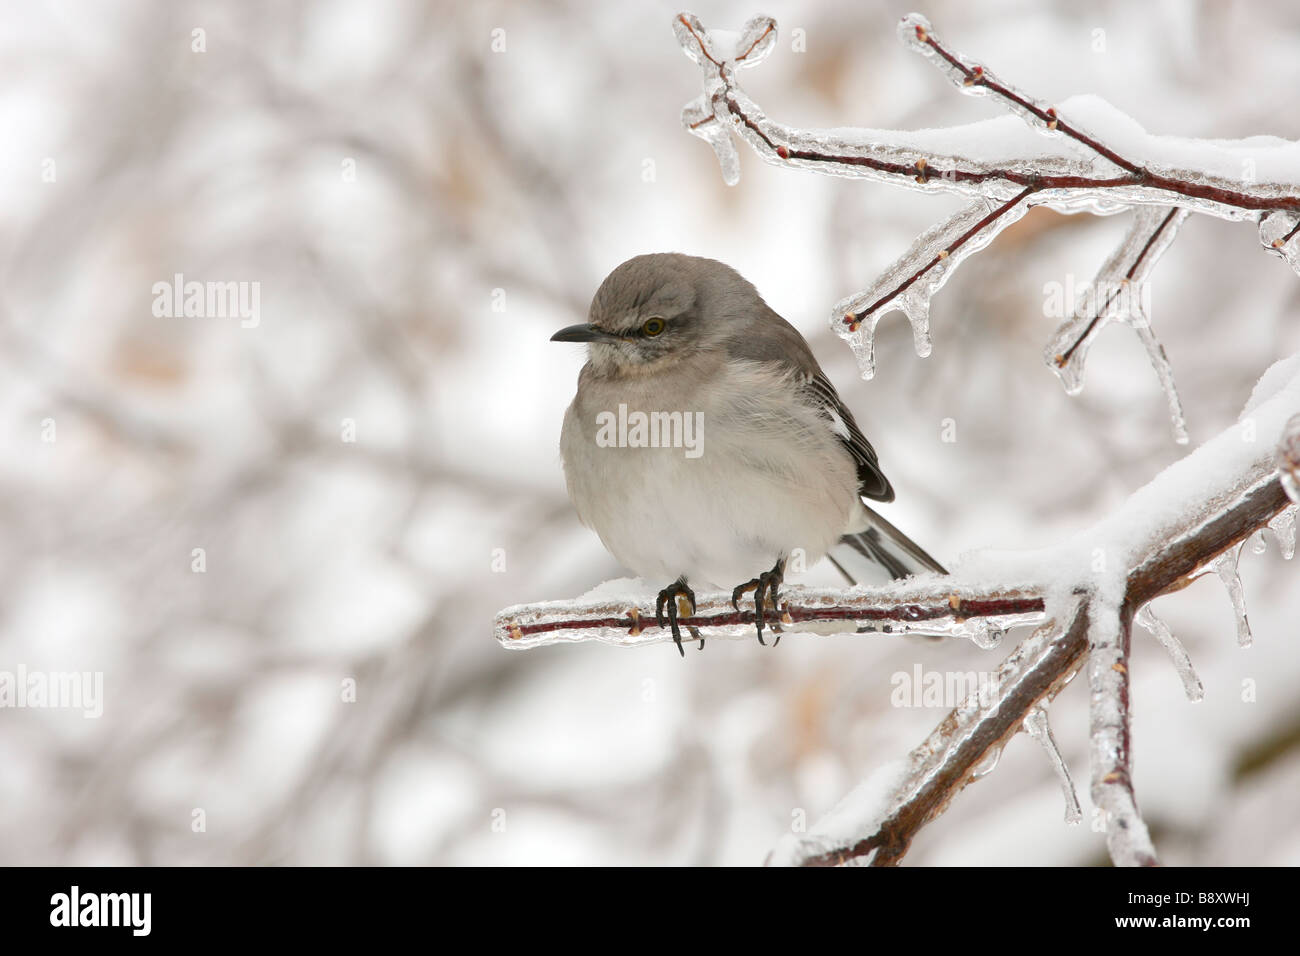 Northern Mockingbird Perched on Ice Covered Branch Stock Photo